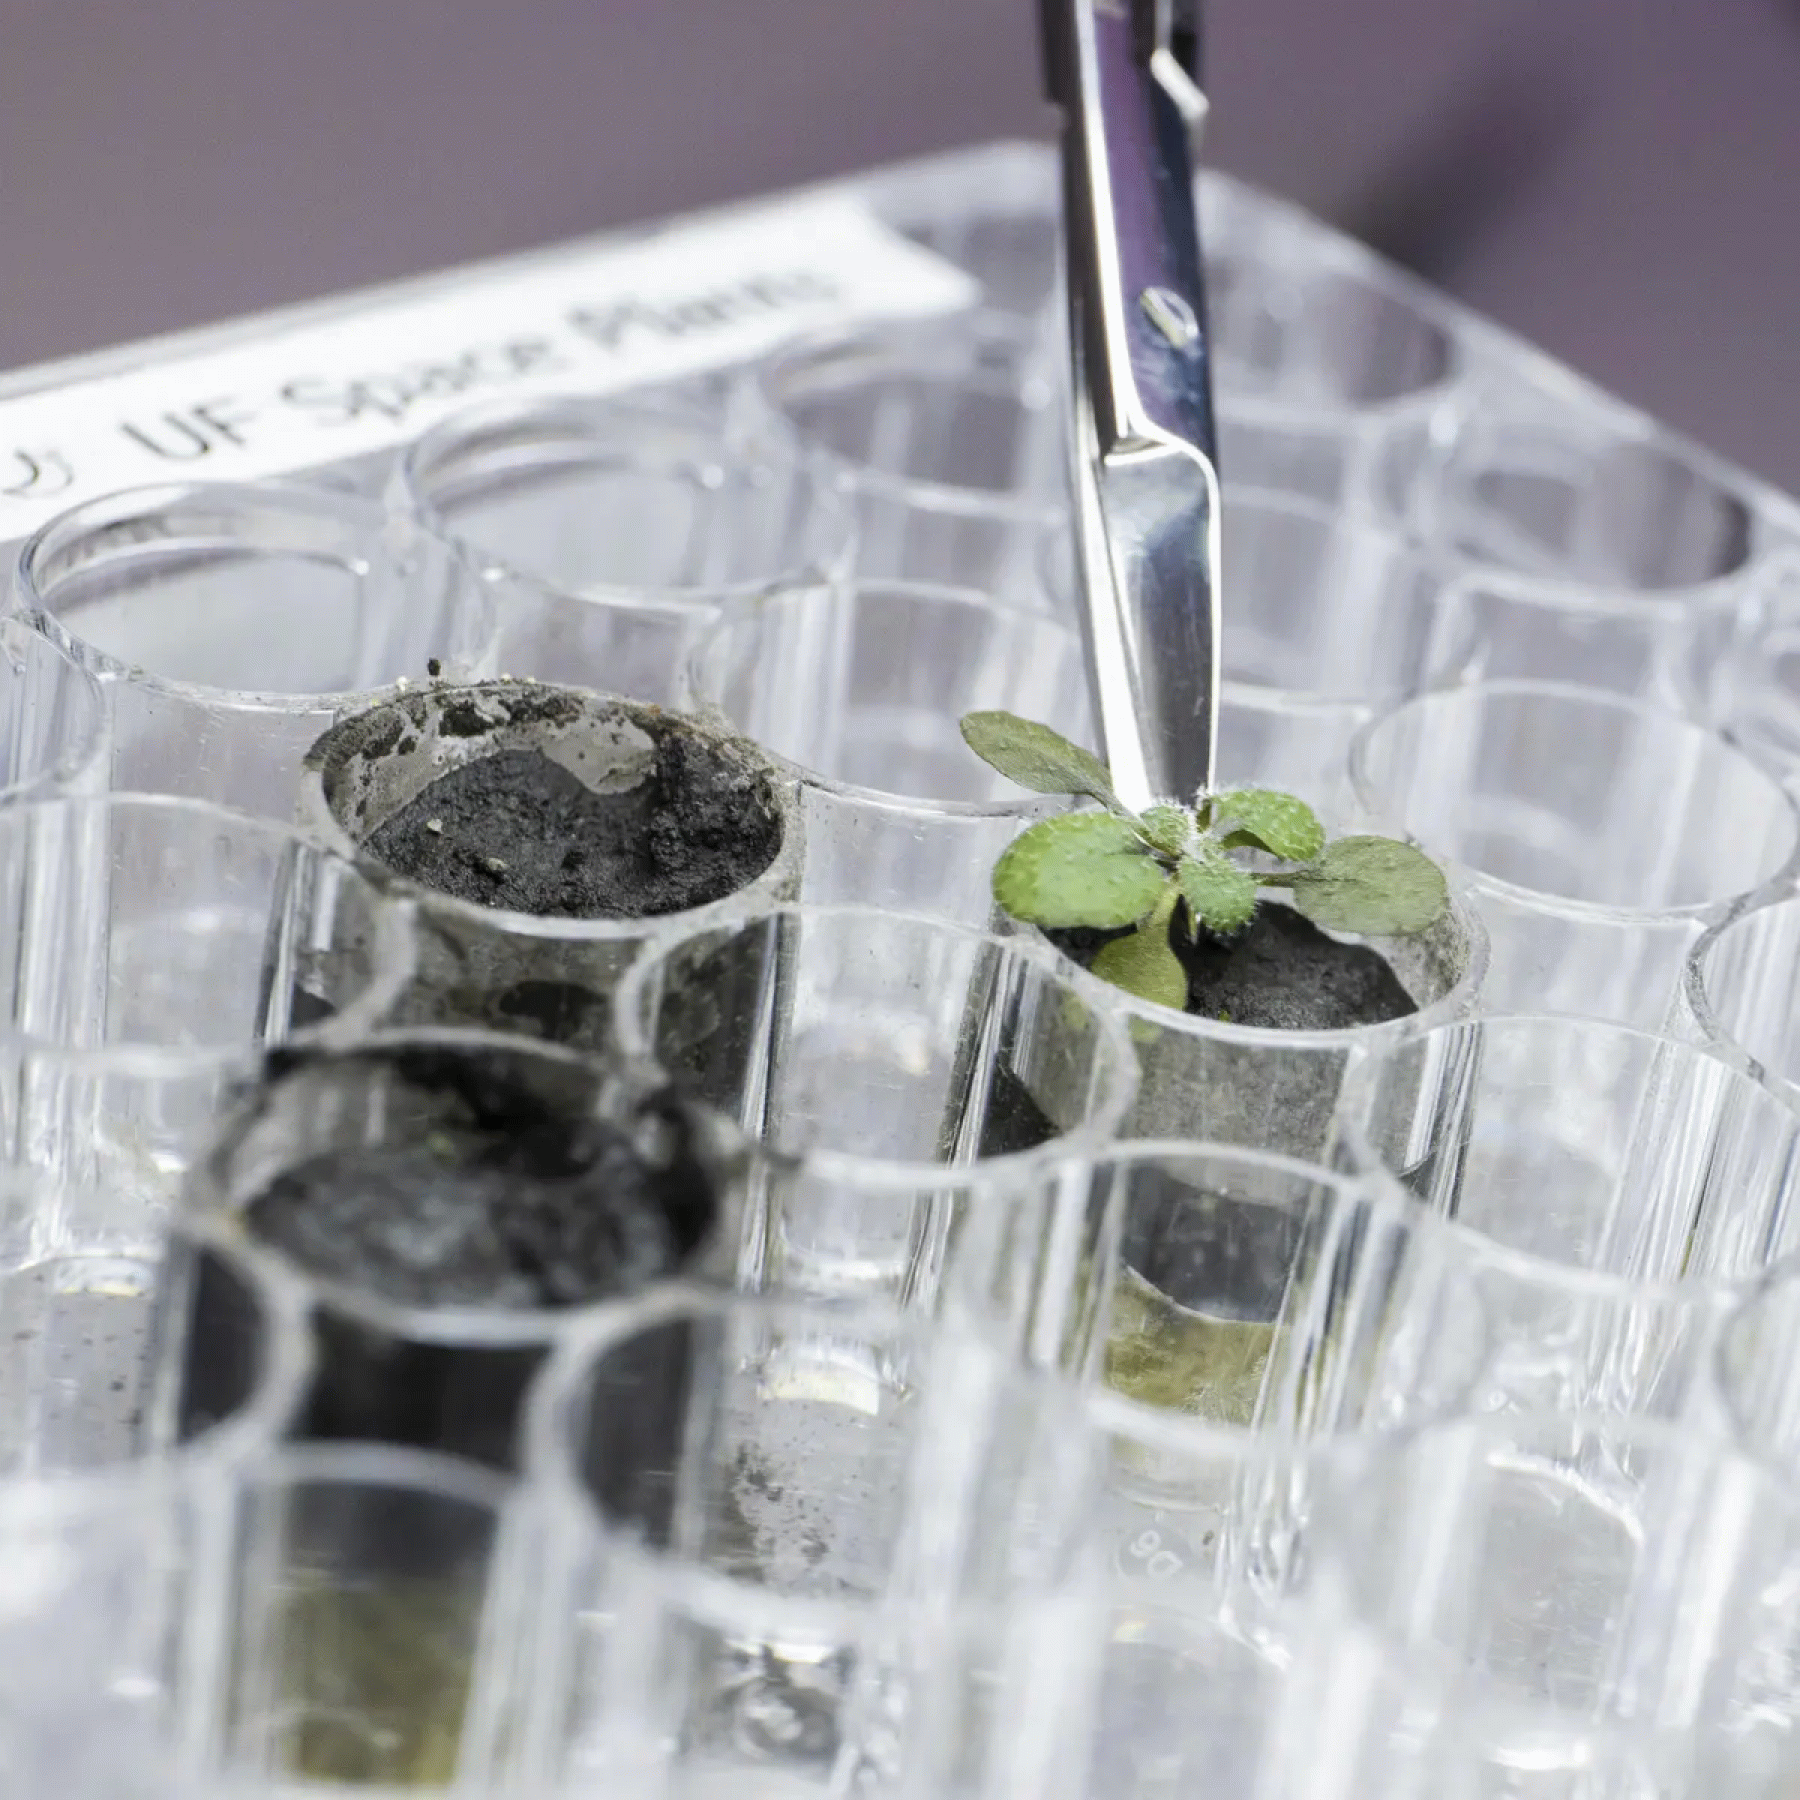 In giant leap forwards scientists grow plants in Moon soil